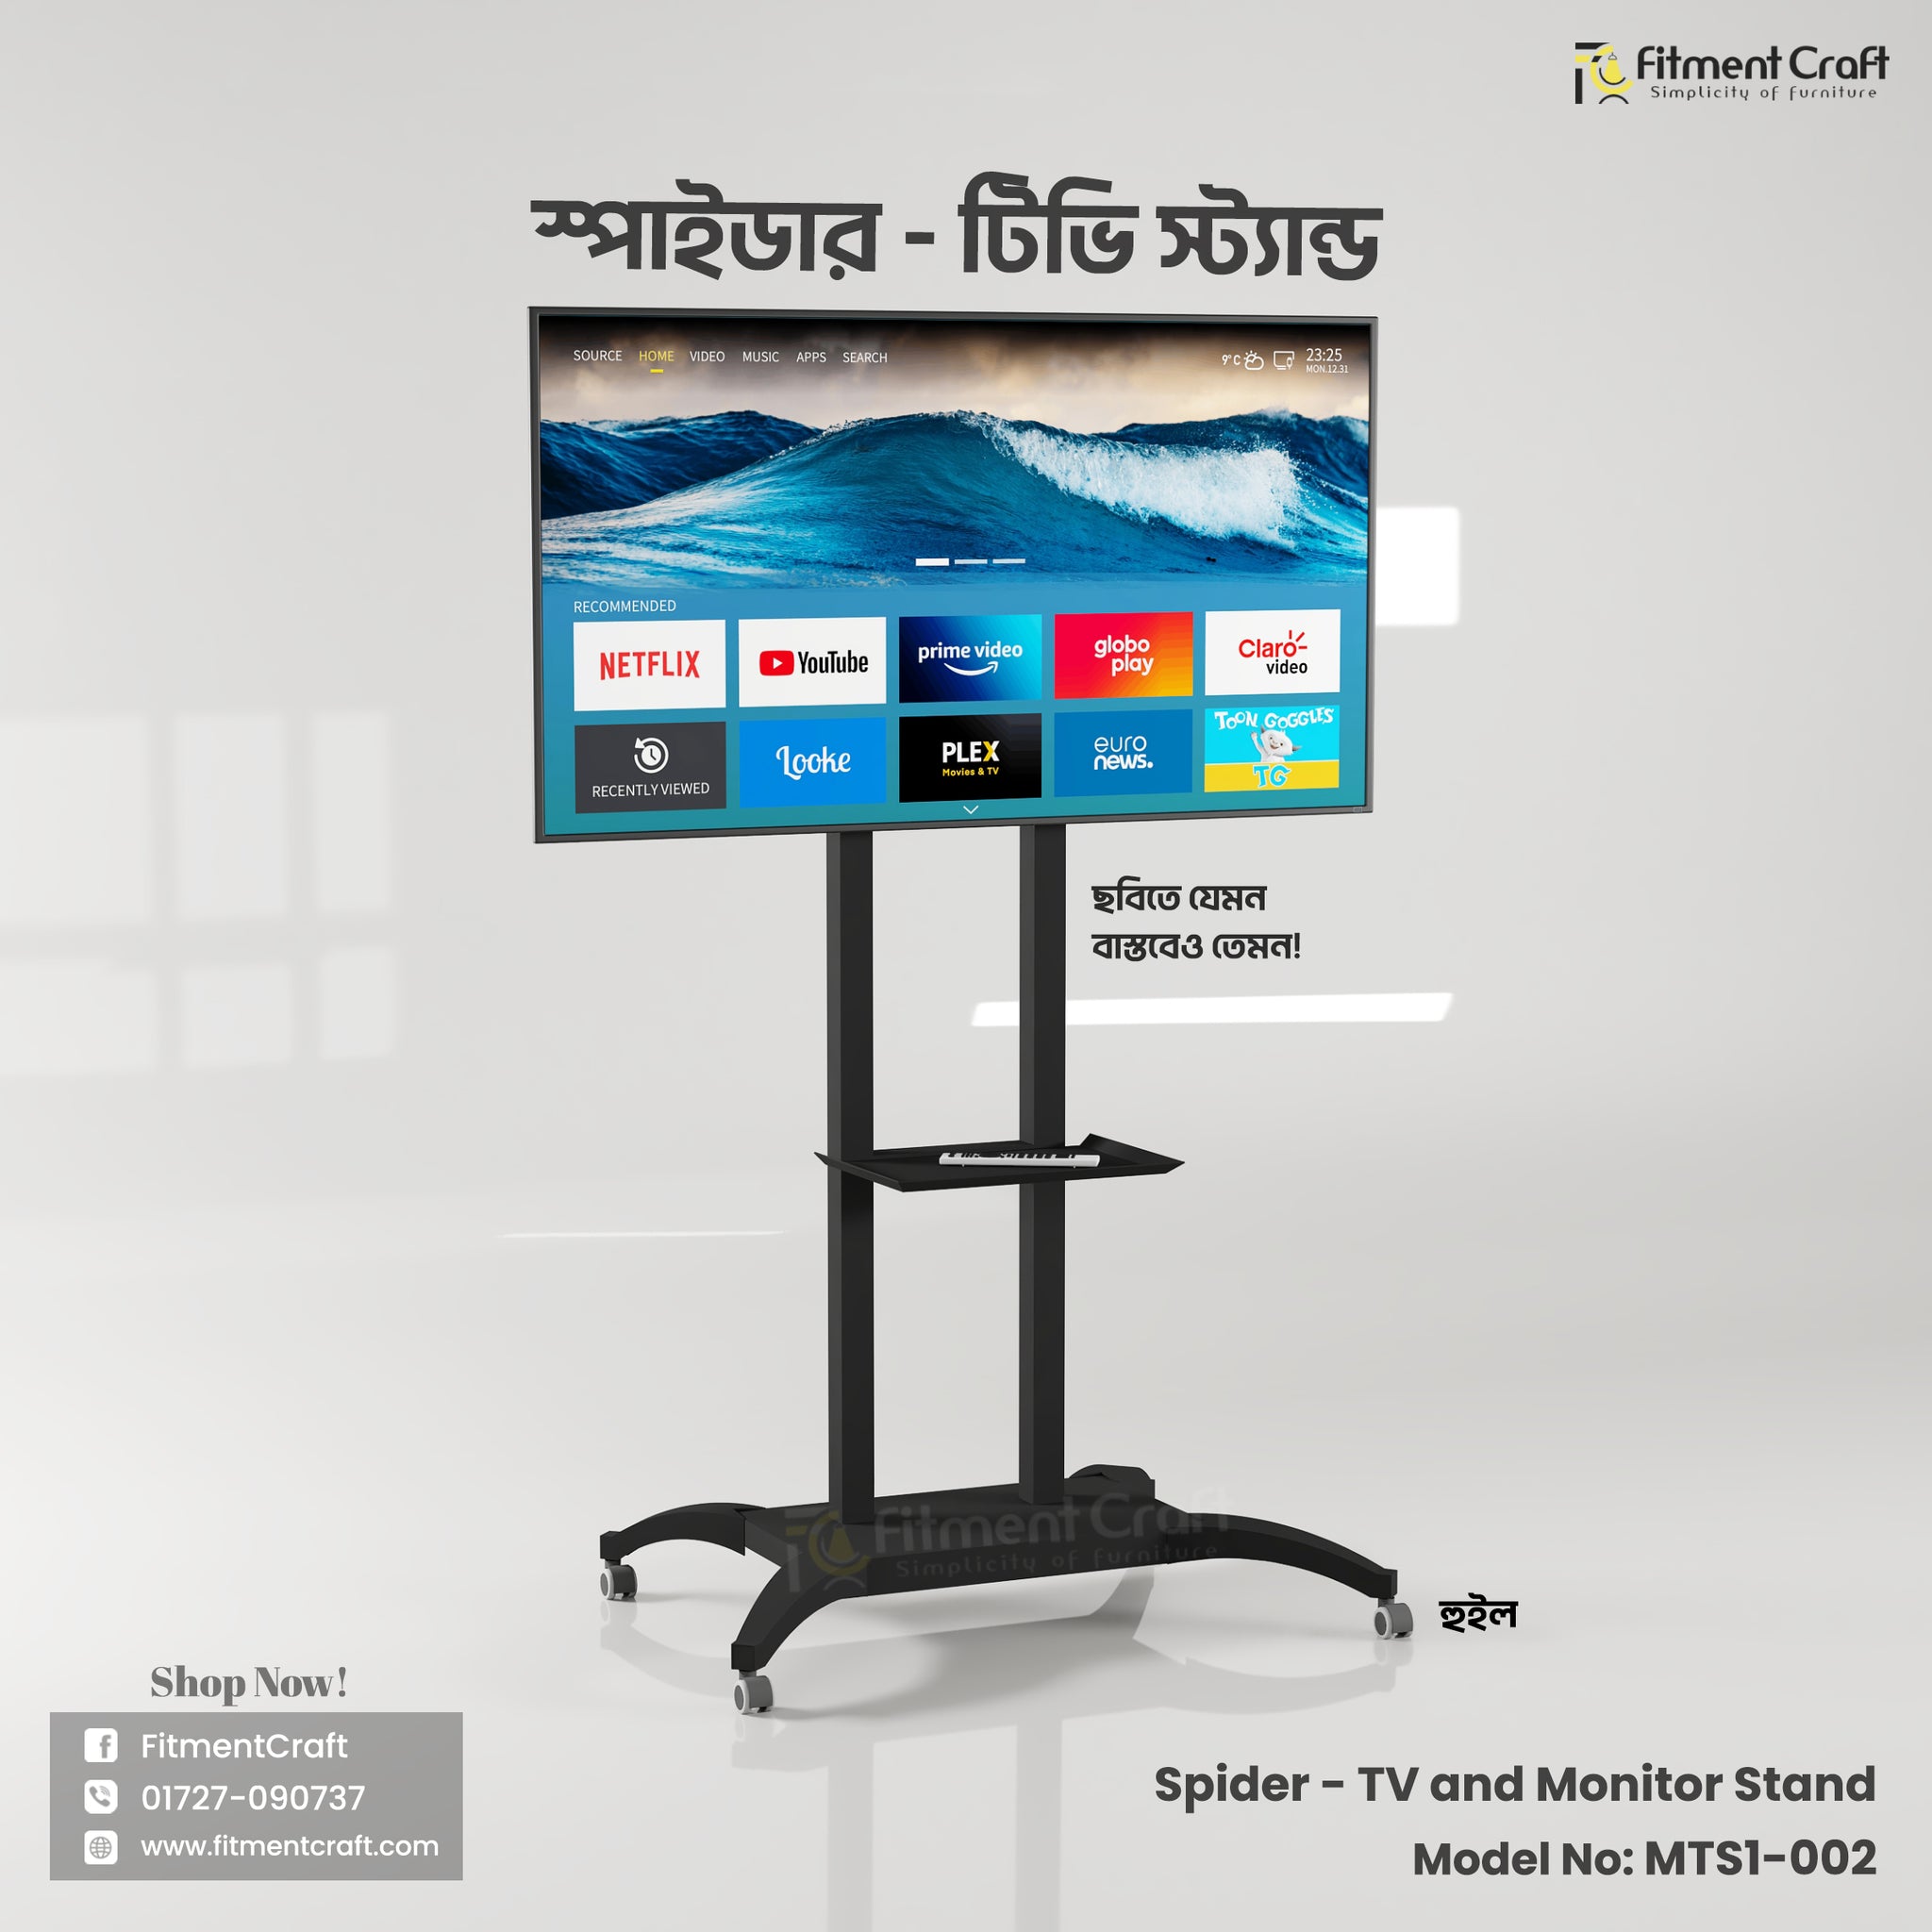 Spider - TV and Monitor Stand | MTS1-002